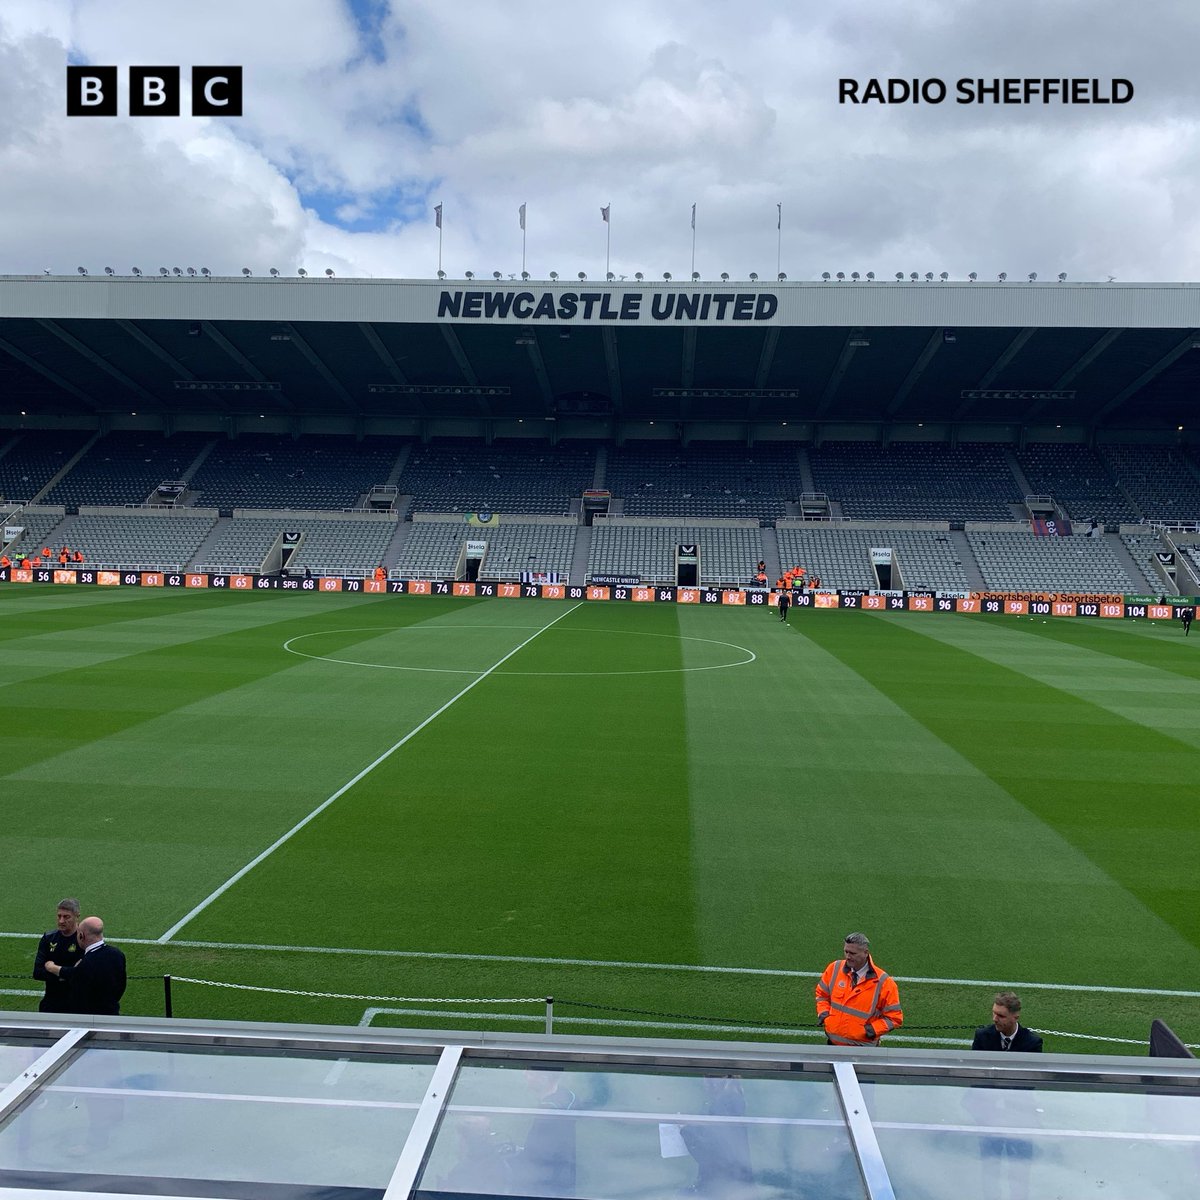 ⚫️⚔️ An afternoon with the Toon Army as Sheffield United will be relegated with defeat against Newcastle United. 📻 Updates on @BBCSheffield DAB & Freeview Channel 734 with @asaba_carl joining me for live comms on @SheffieldUnited website. #SUFC | @footballheaven